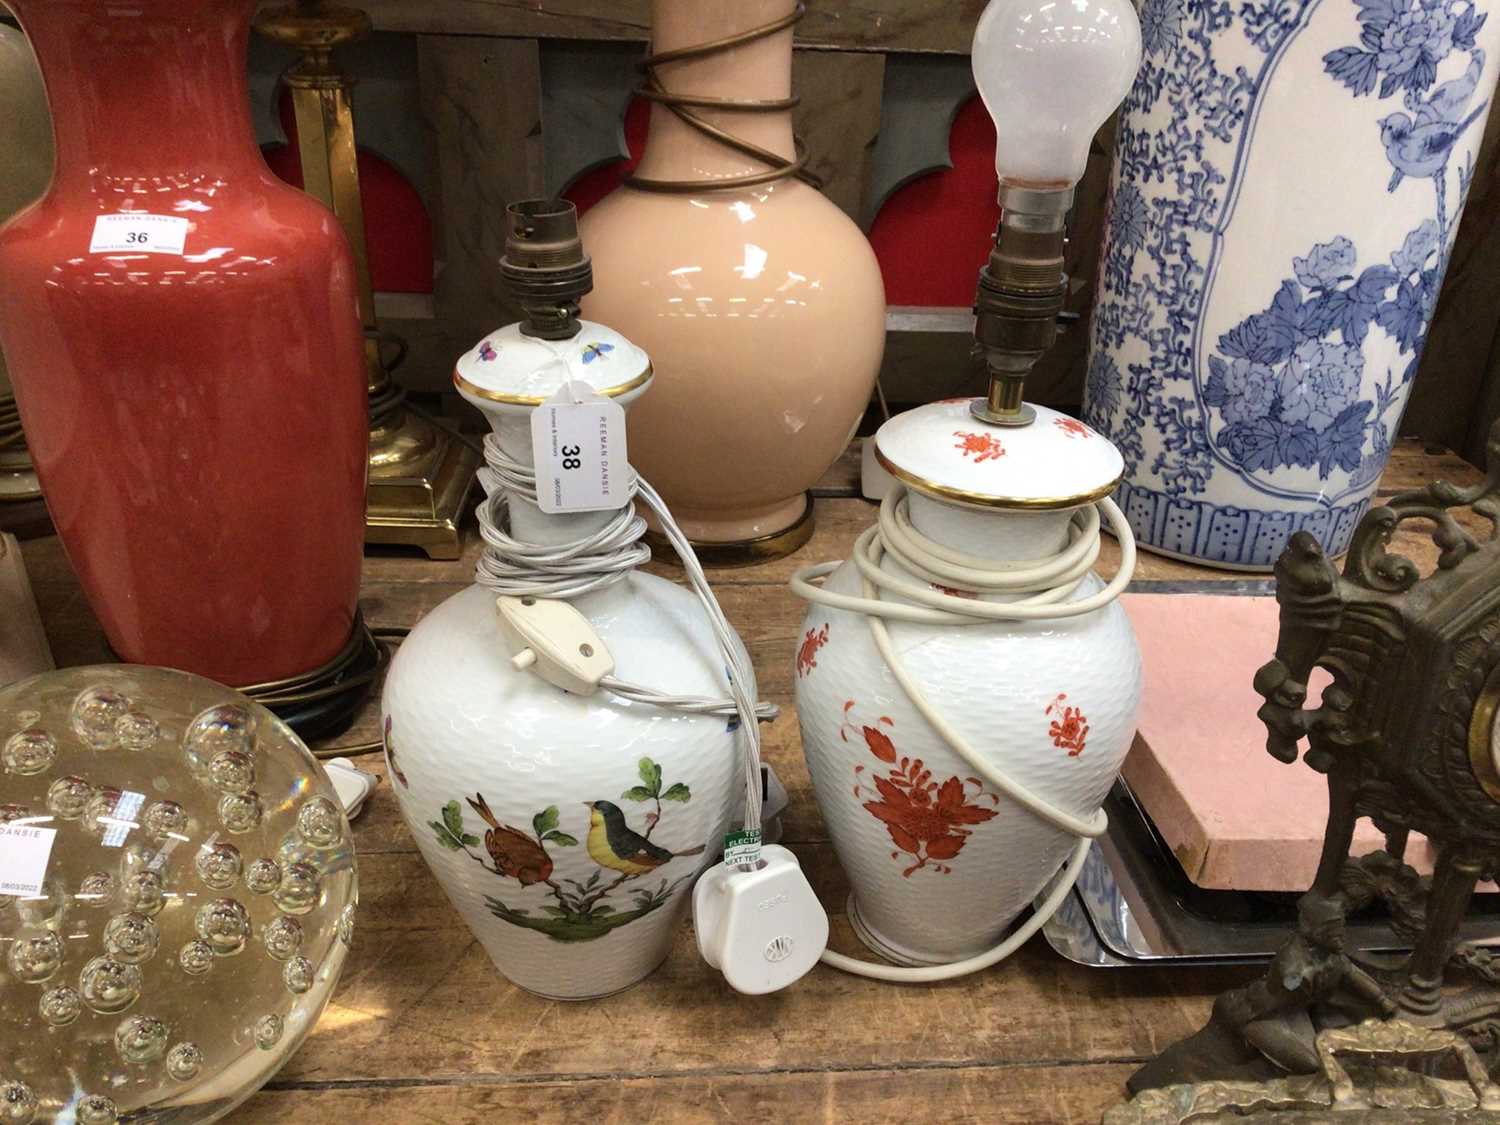 Lot 38 - Herend porcelain table lamp with hand painted bird and butterfly decoration, together with another Herend table lamp (a/f)